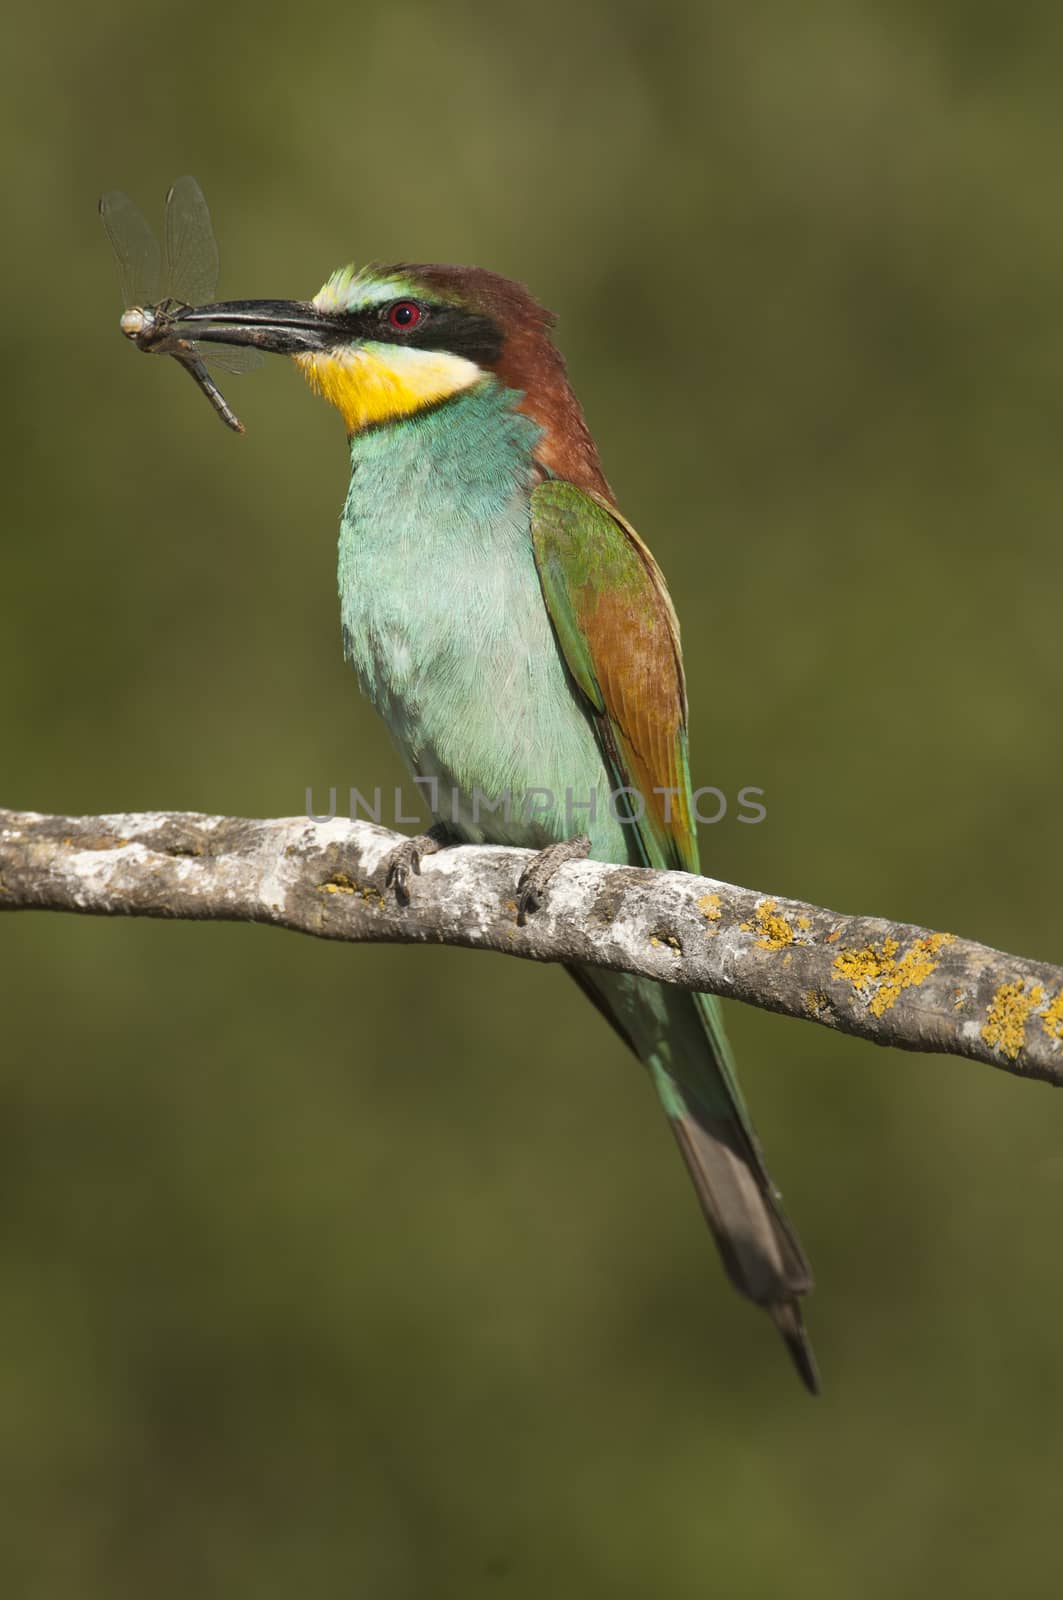 European bee-eater (Merops apiaster), Perched on a branch with a